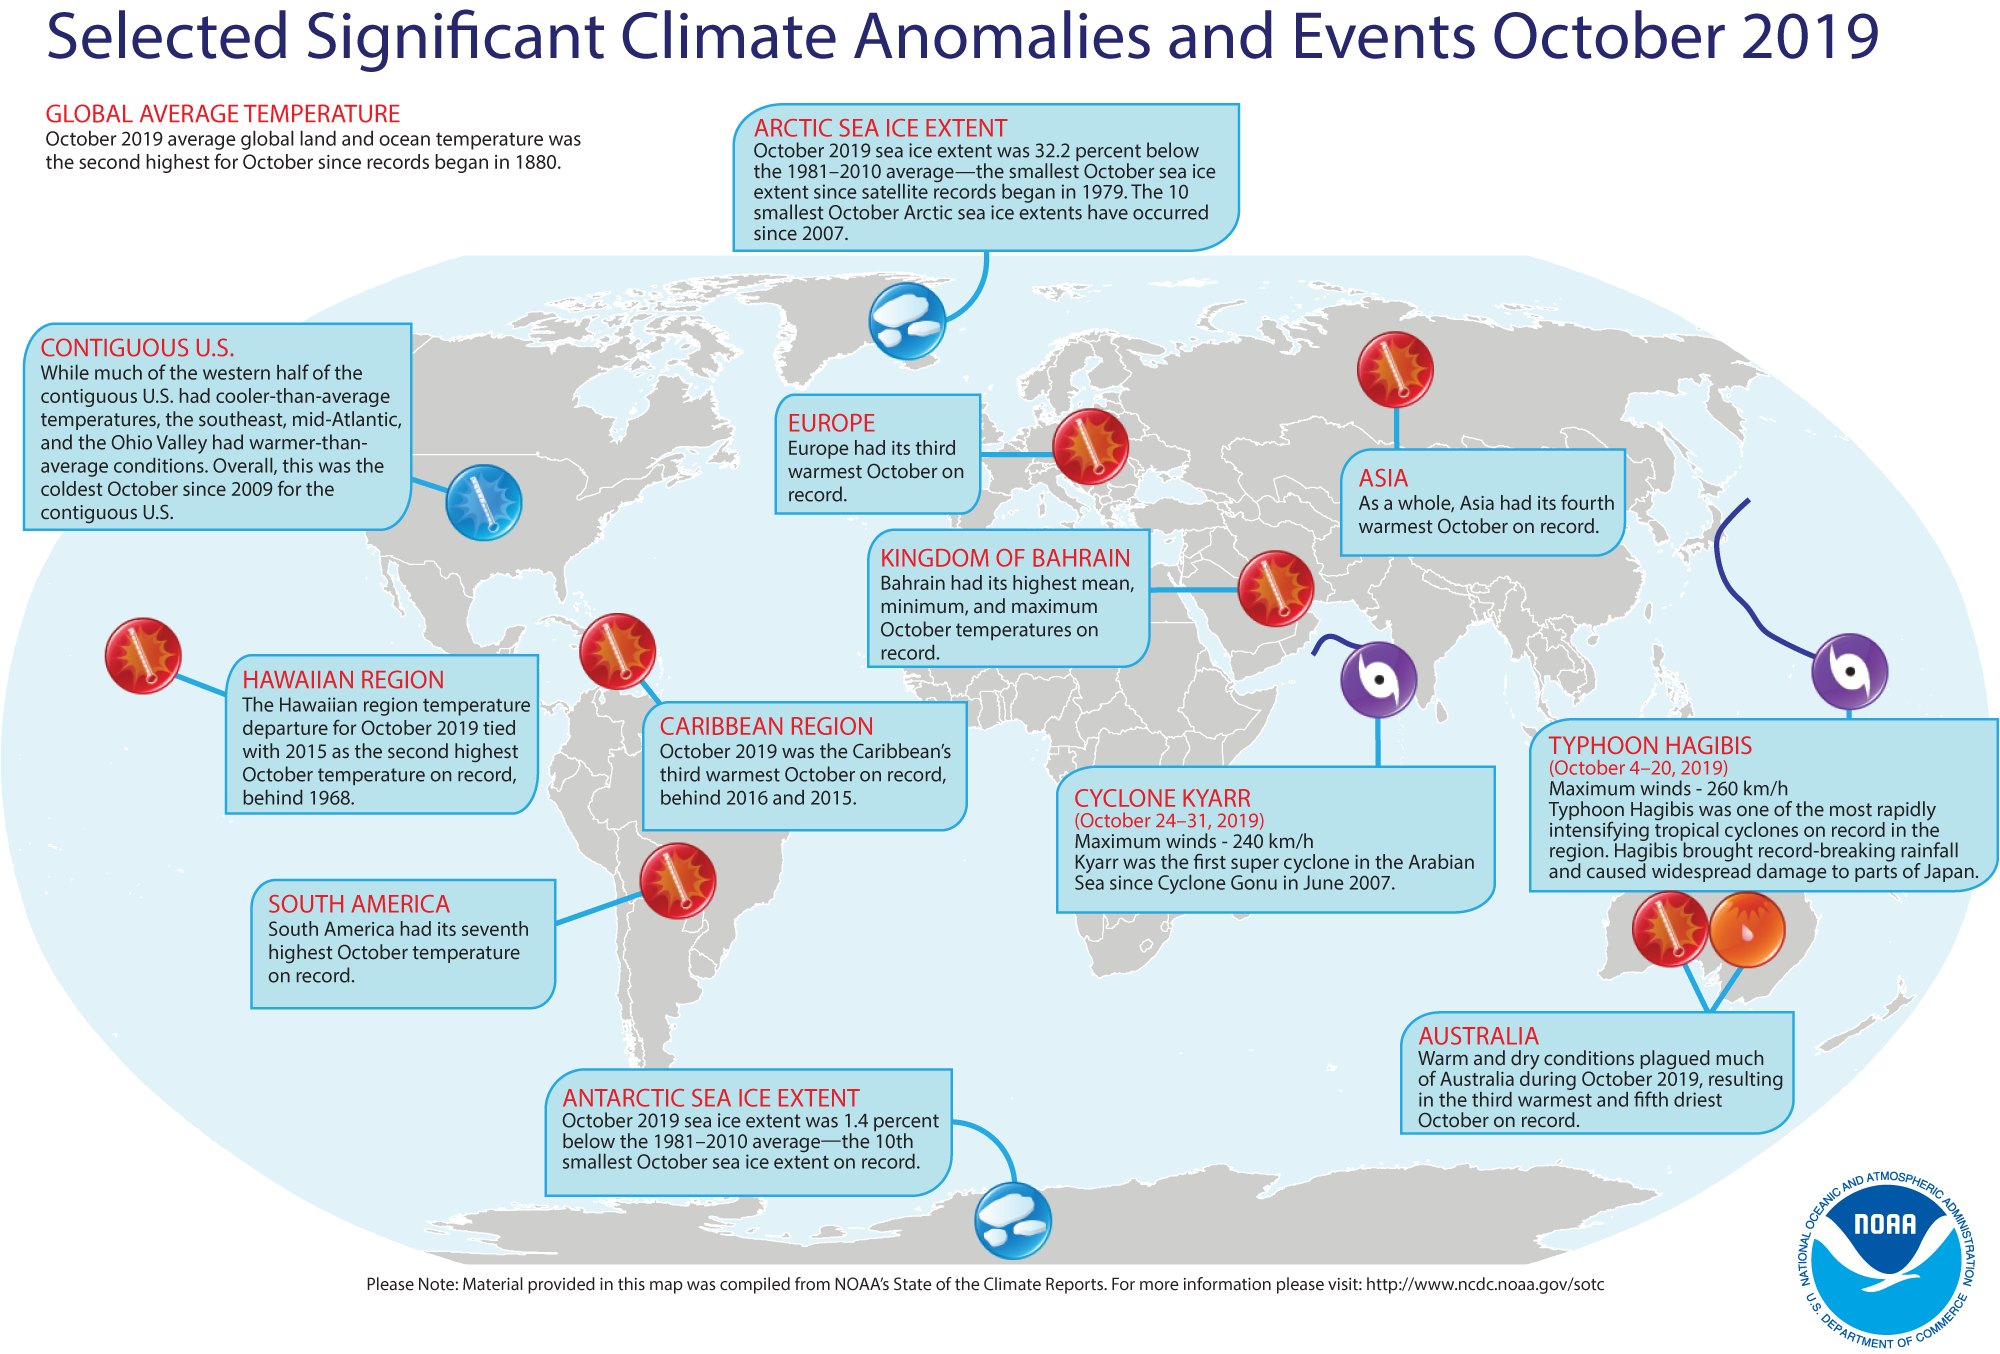 An annotated map showing notable climate events that occurred around the world in October 2019. For details, see the short bulleted list below in our story and at http://bit.ly/Global201910